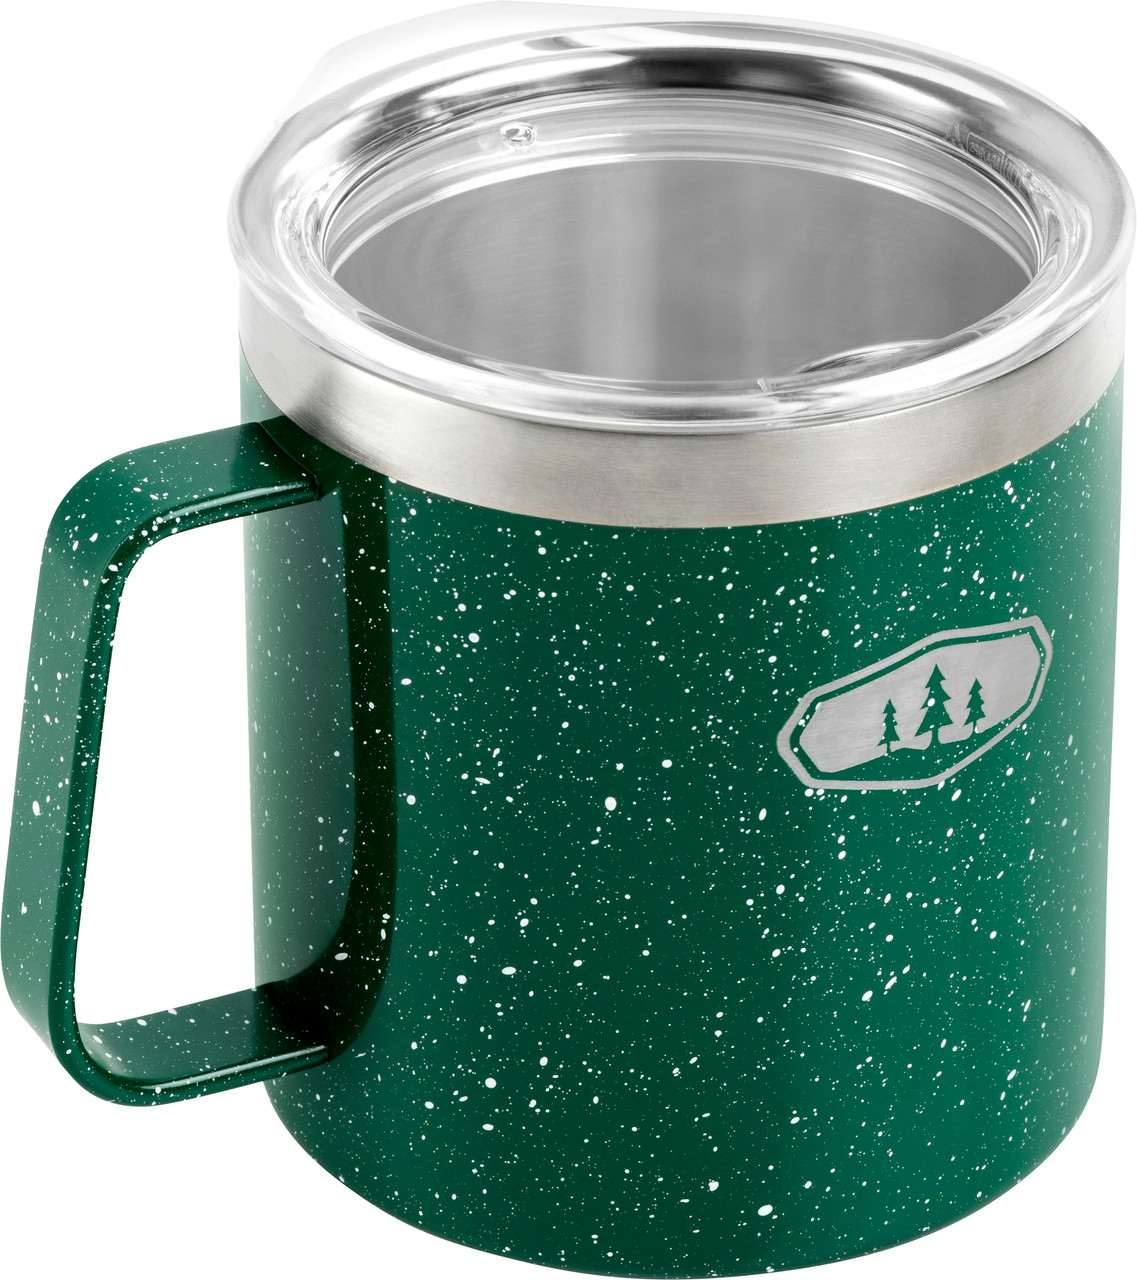 Glacier Stainless Steel Camp Cup Green Speckle